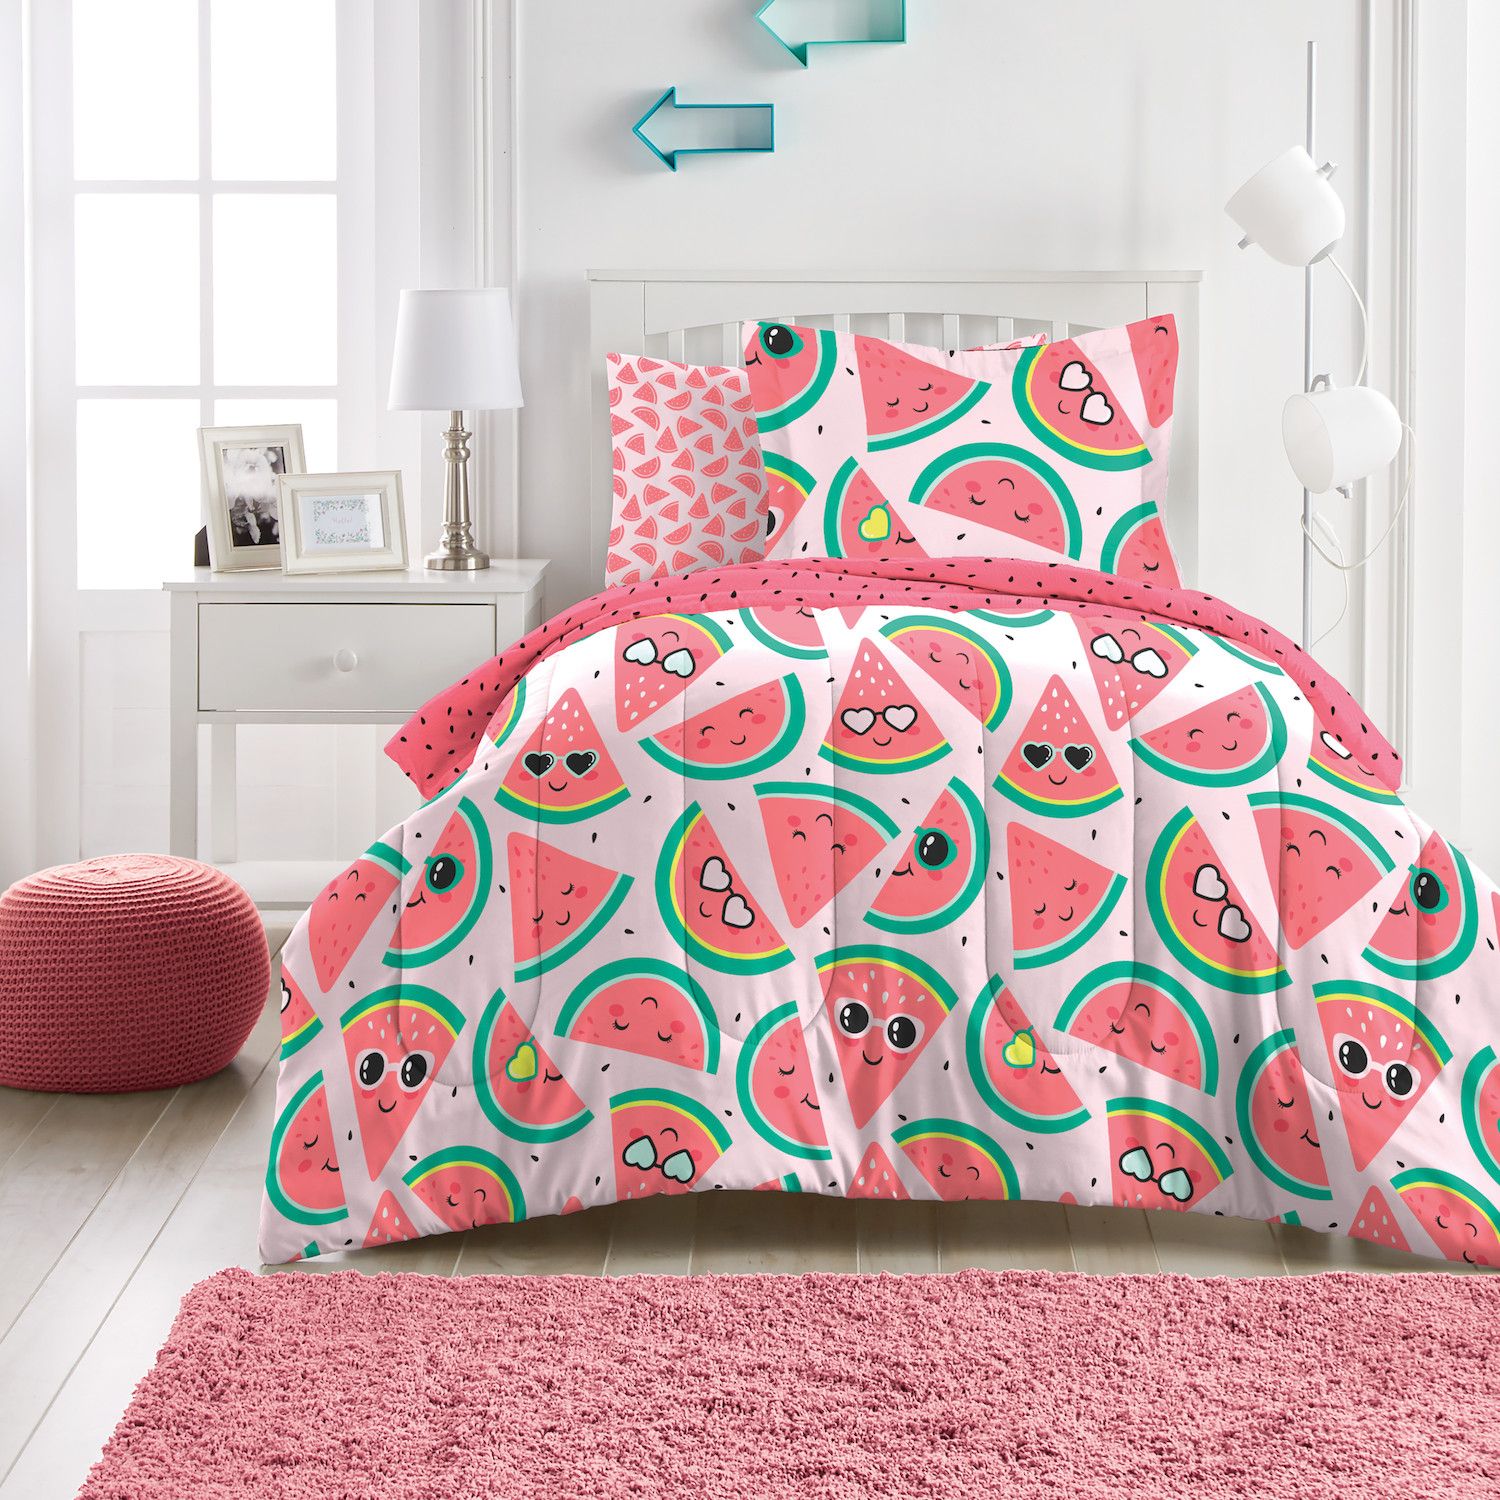 Image for Dream Factory Watermelon Jam 7-piece Comforter Set and Sheet Set at Kohl's.